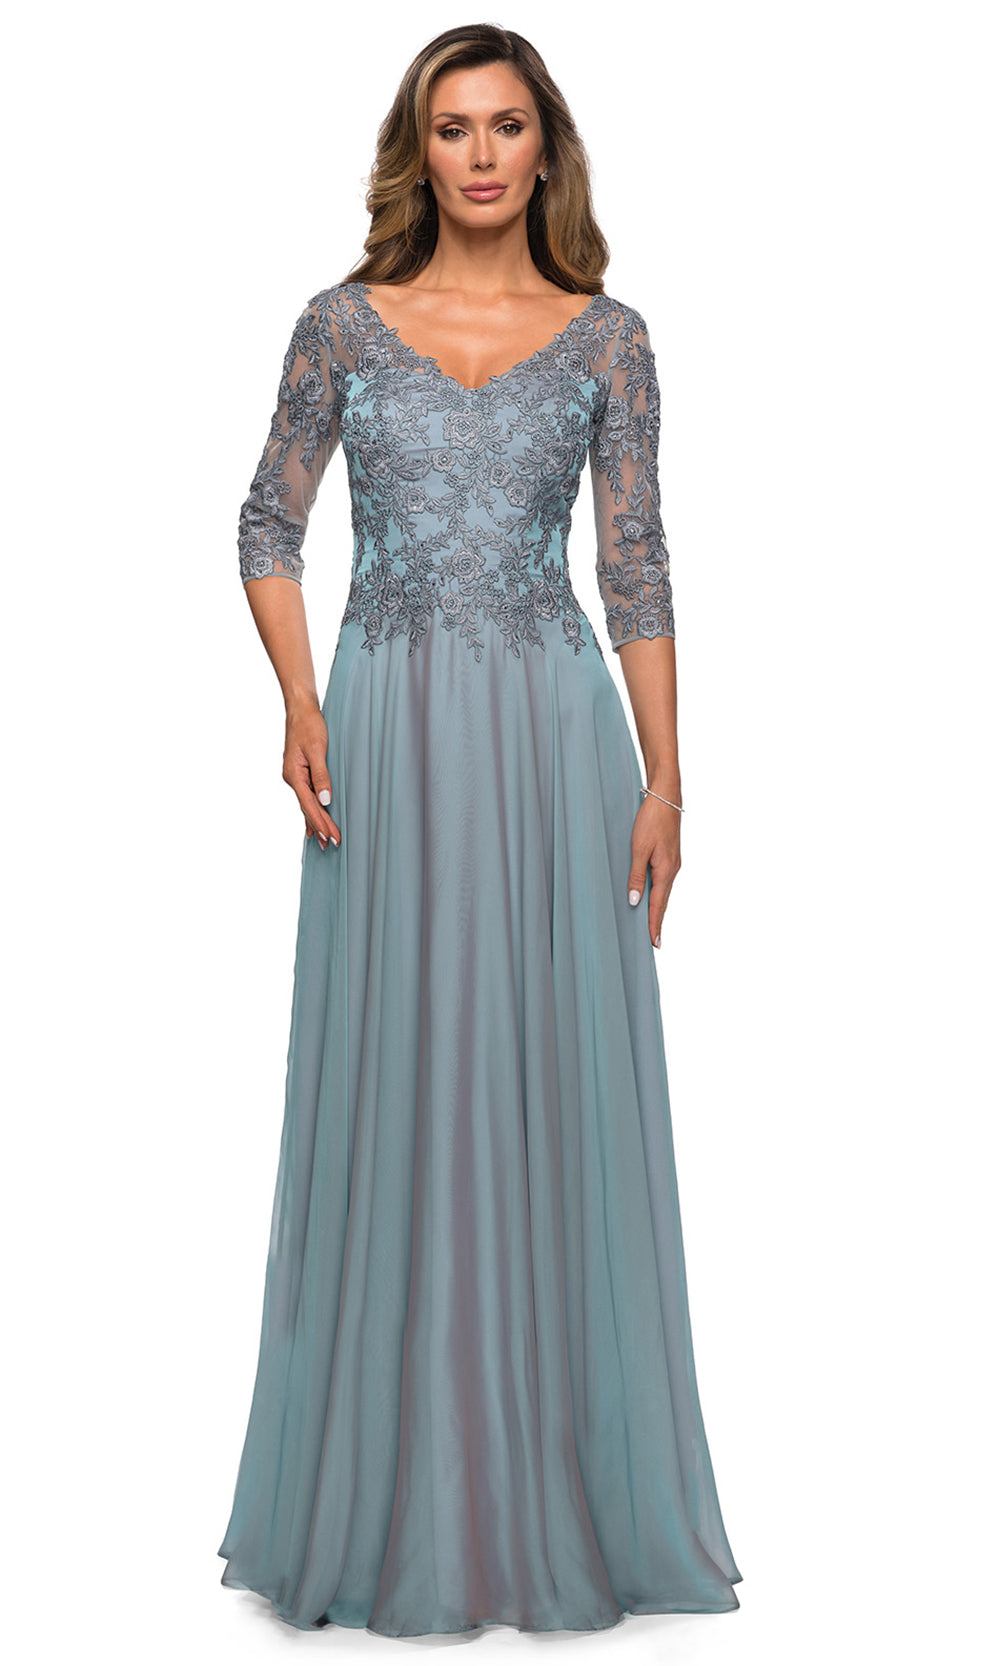 La Femme - 28106 Quarter Sleeve Embroidered Lace Bodice A-Line Dress In Blue